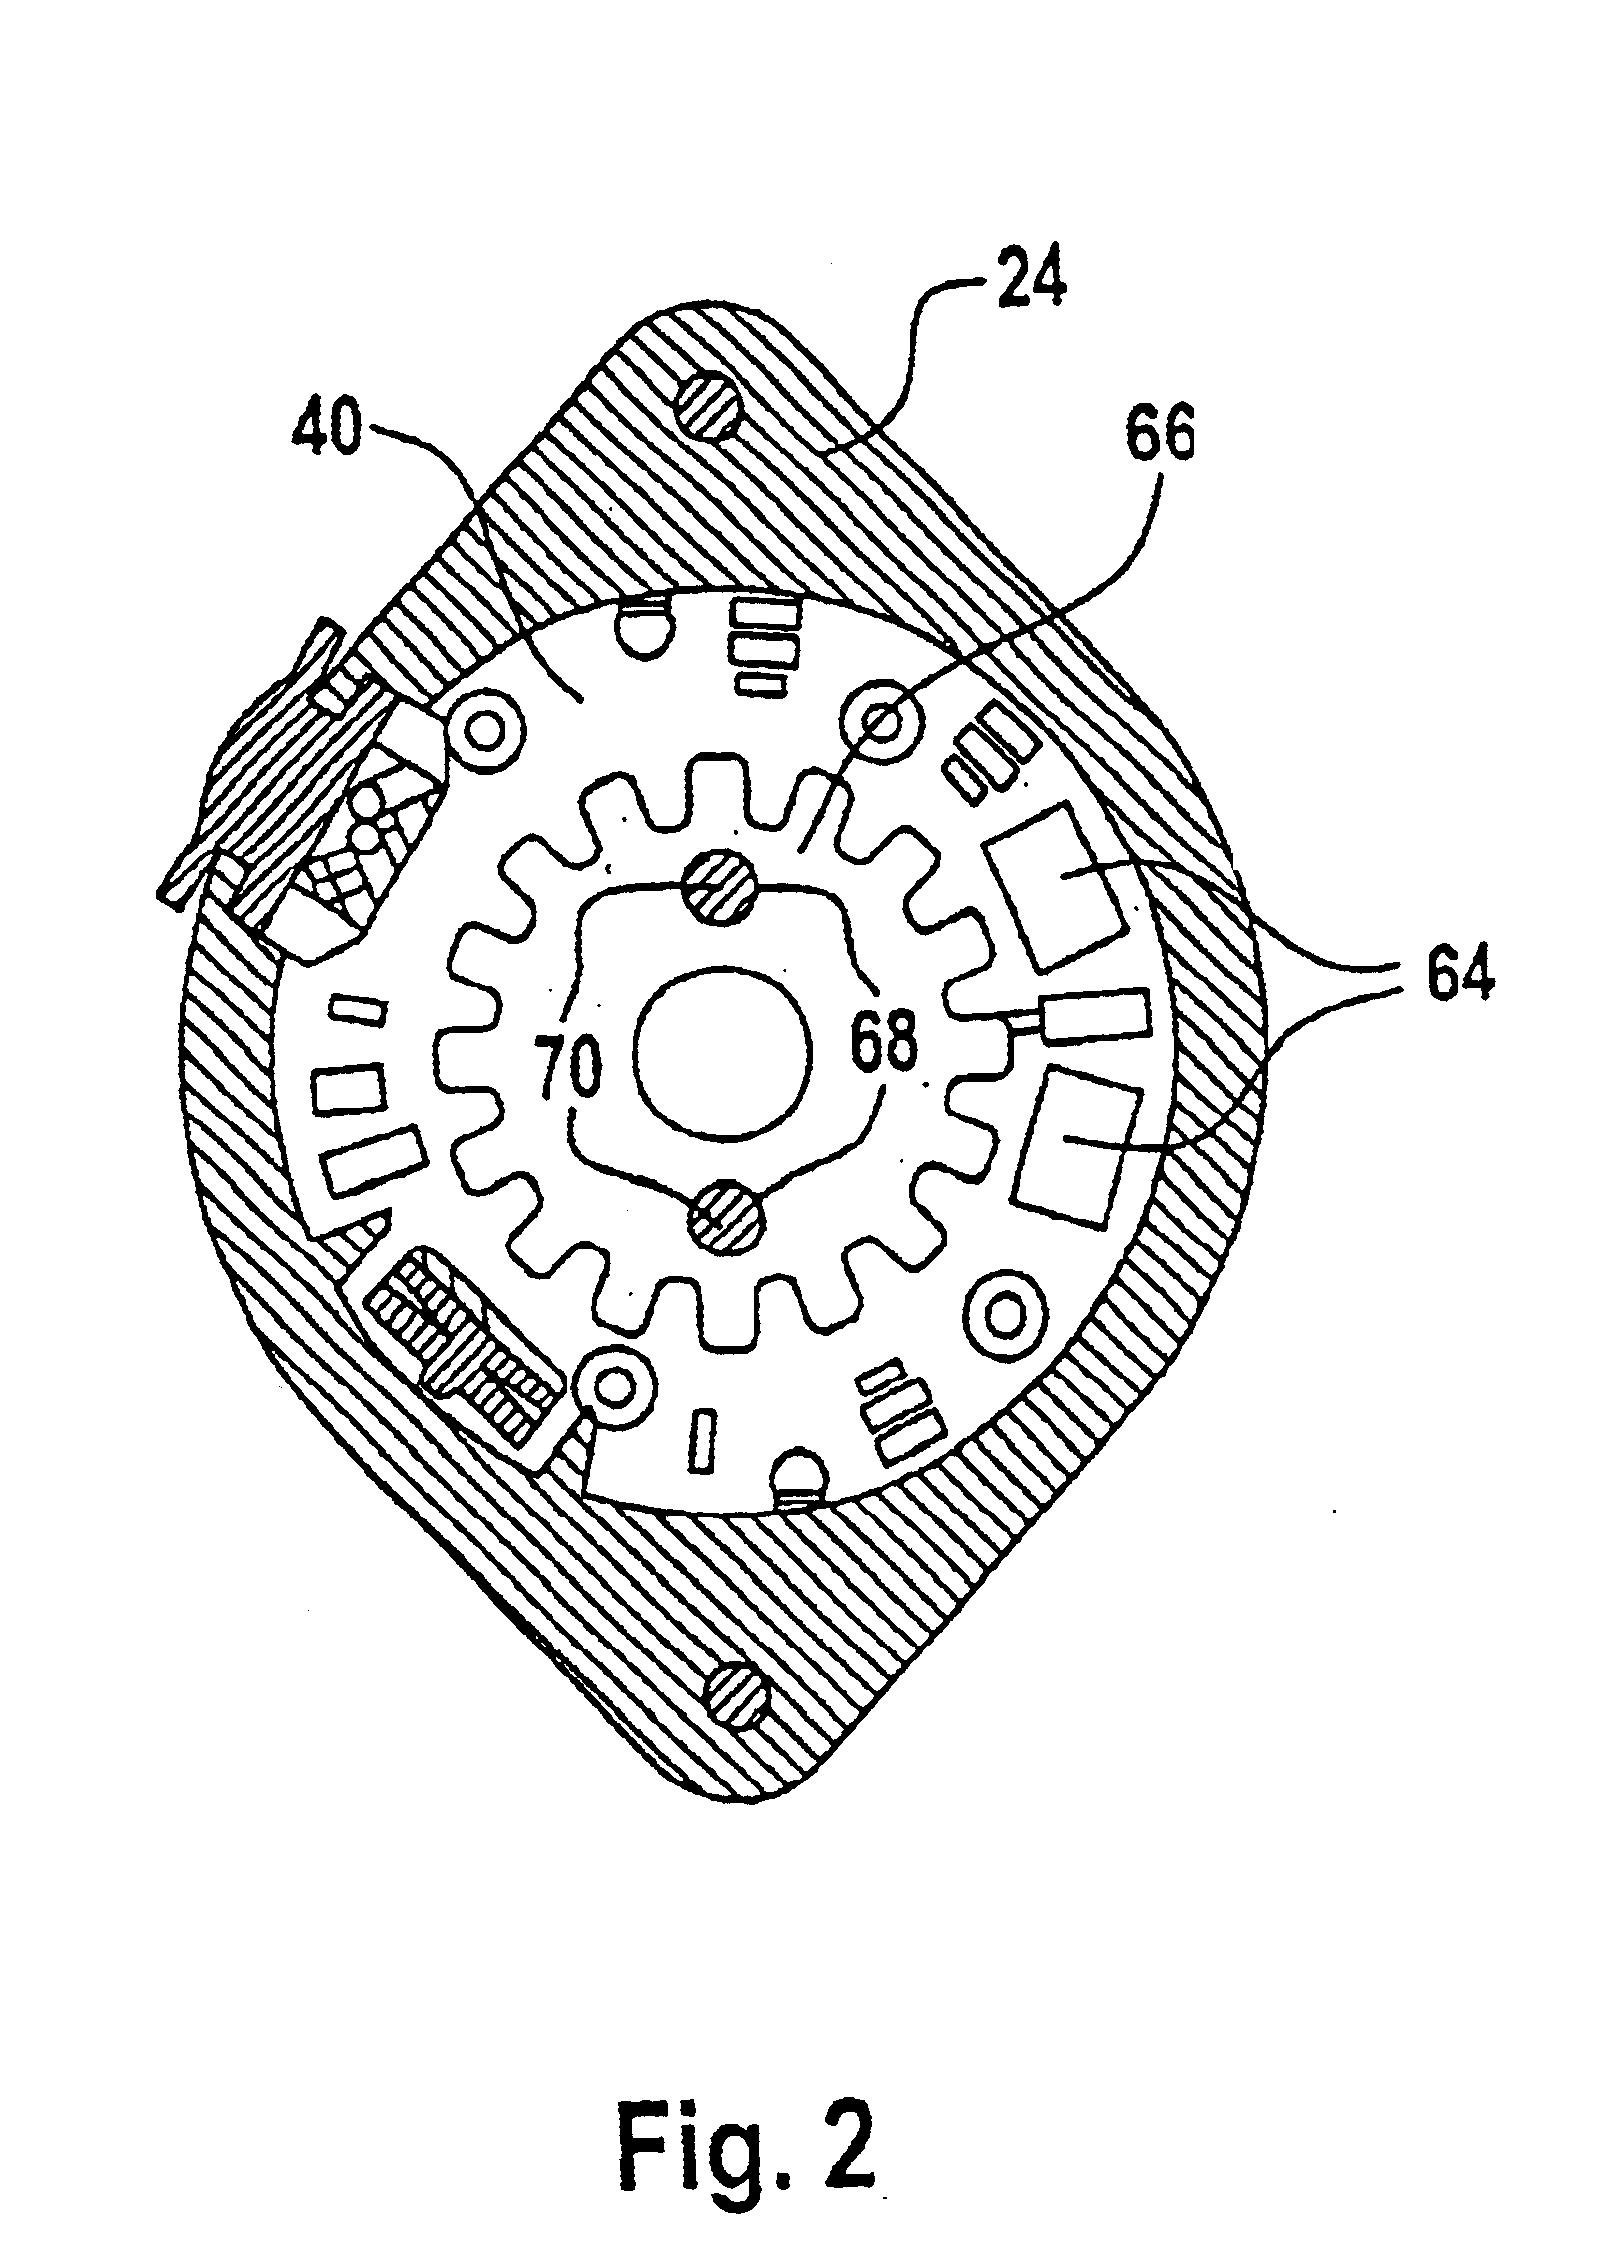 Actuating device, particularly for actuating locking differentials on vehicles